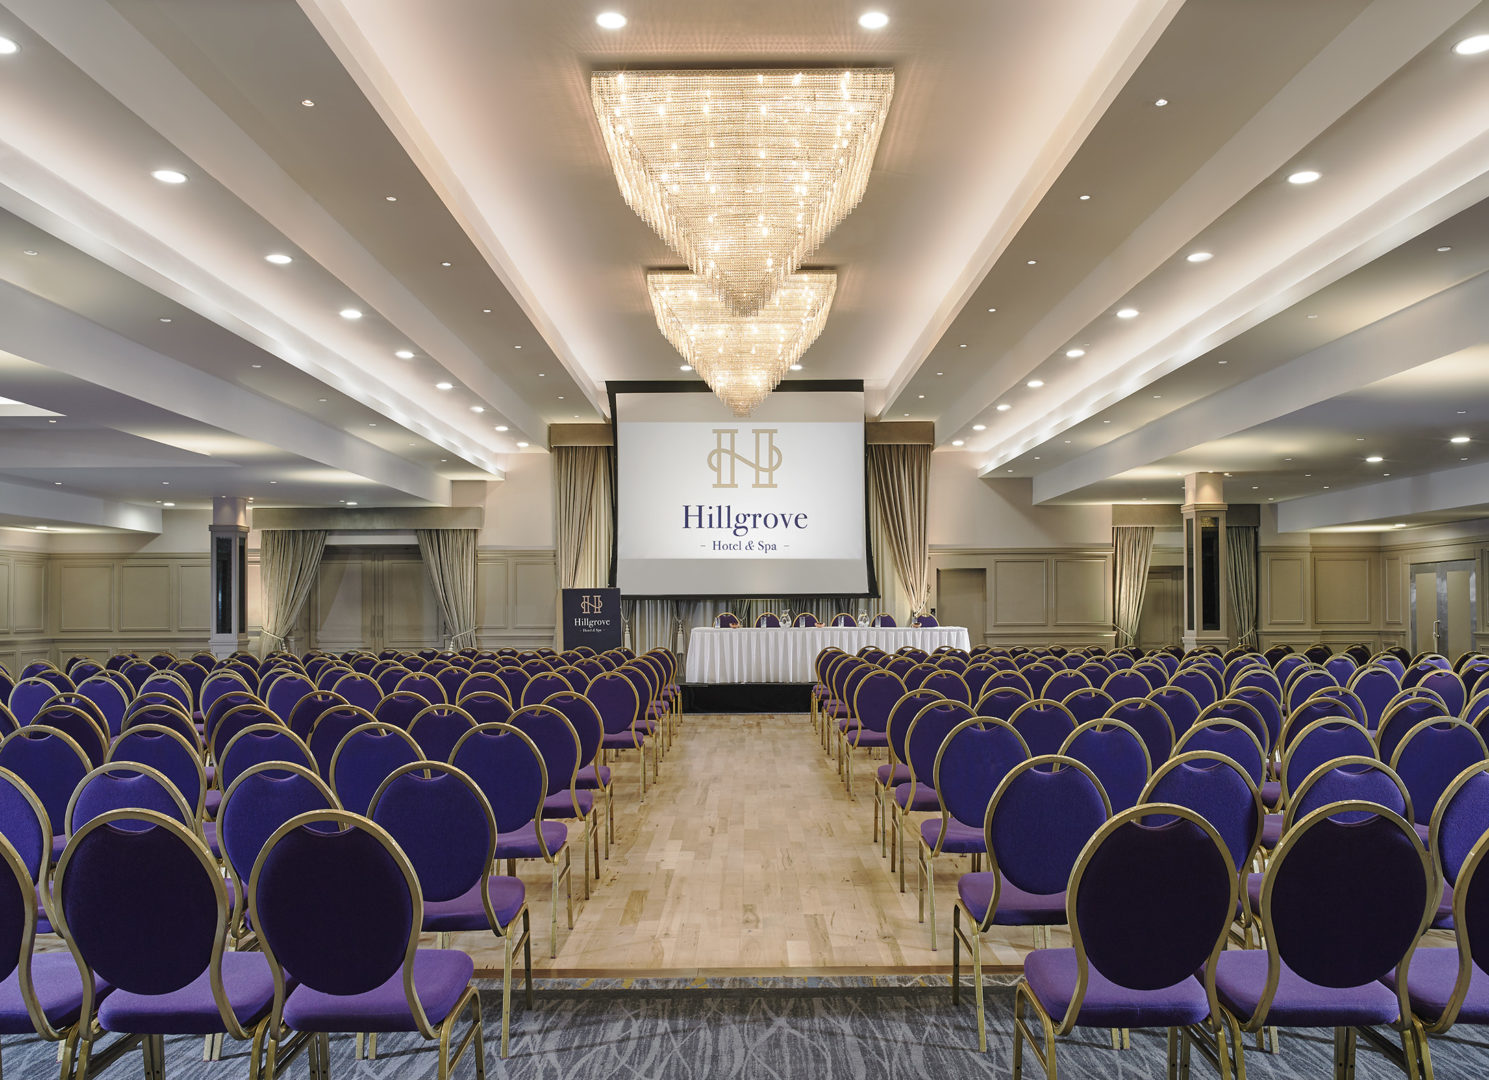 Conference Rooms | Meeting Venues Monaghan | Hillgrove Hotel